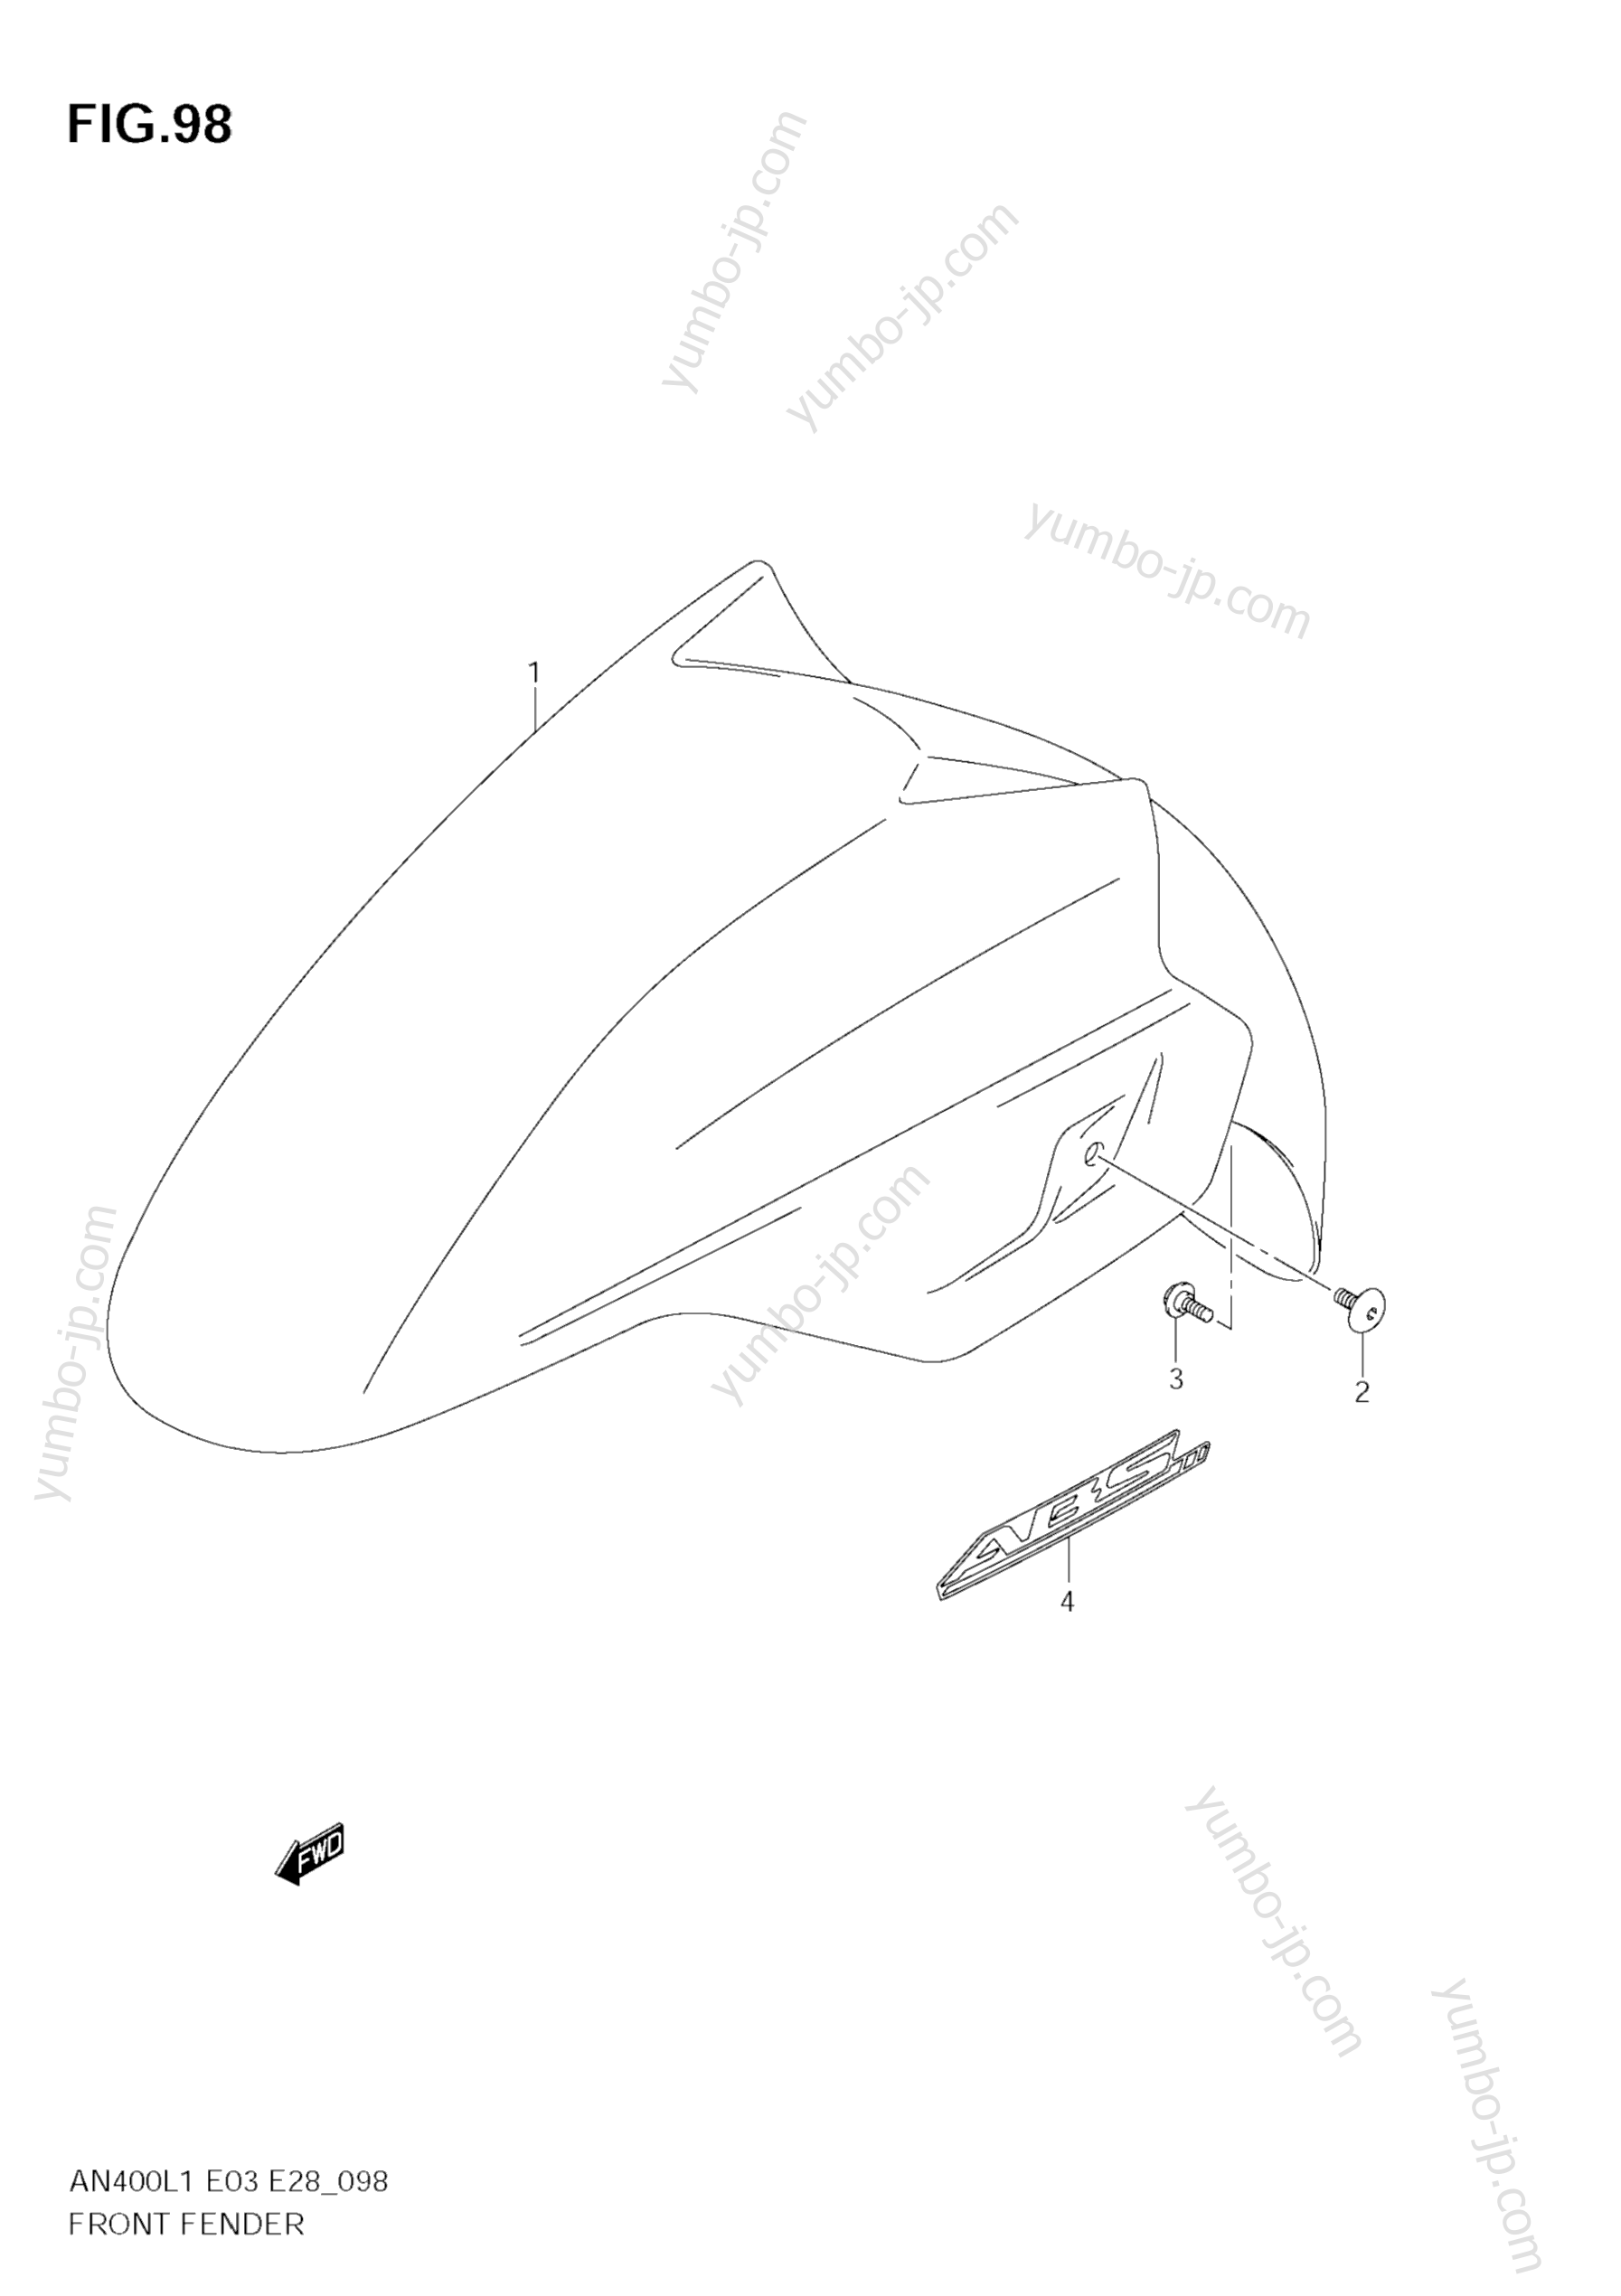 FRONT FENDER (AN400ZA L1 E28) for scooters SUZUKI Burgman (AN400) 2011 year